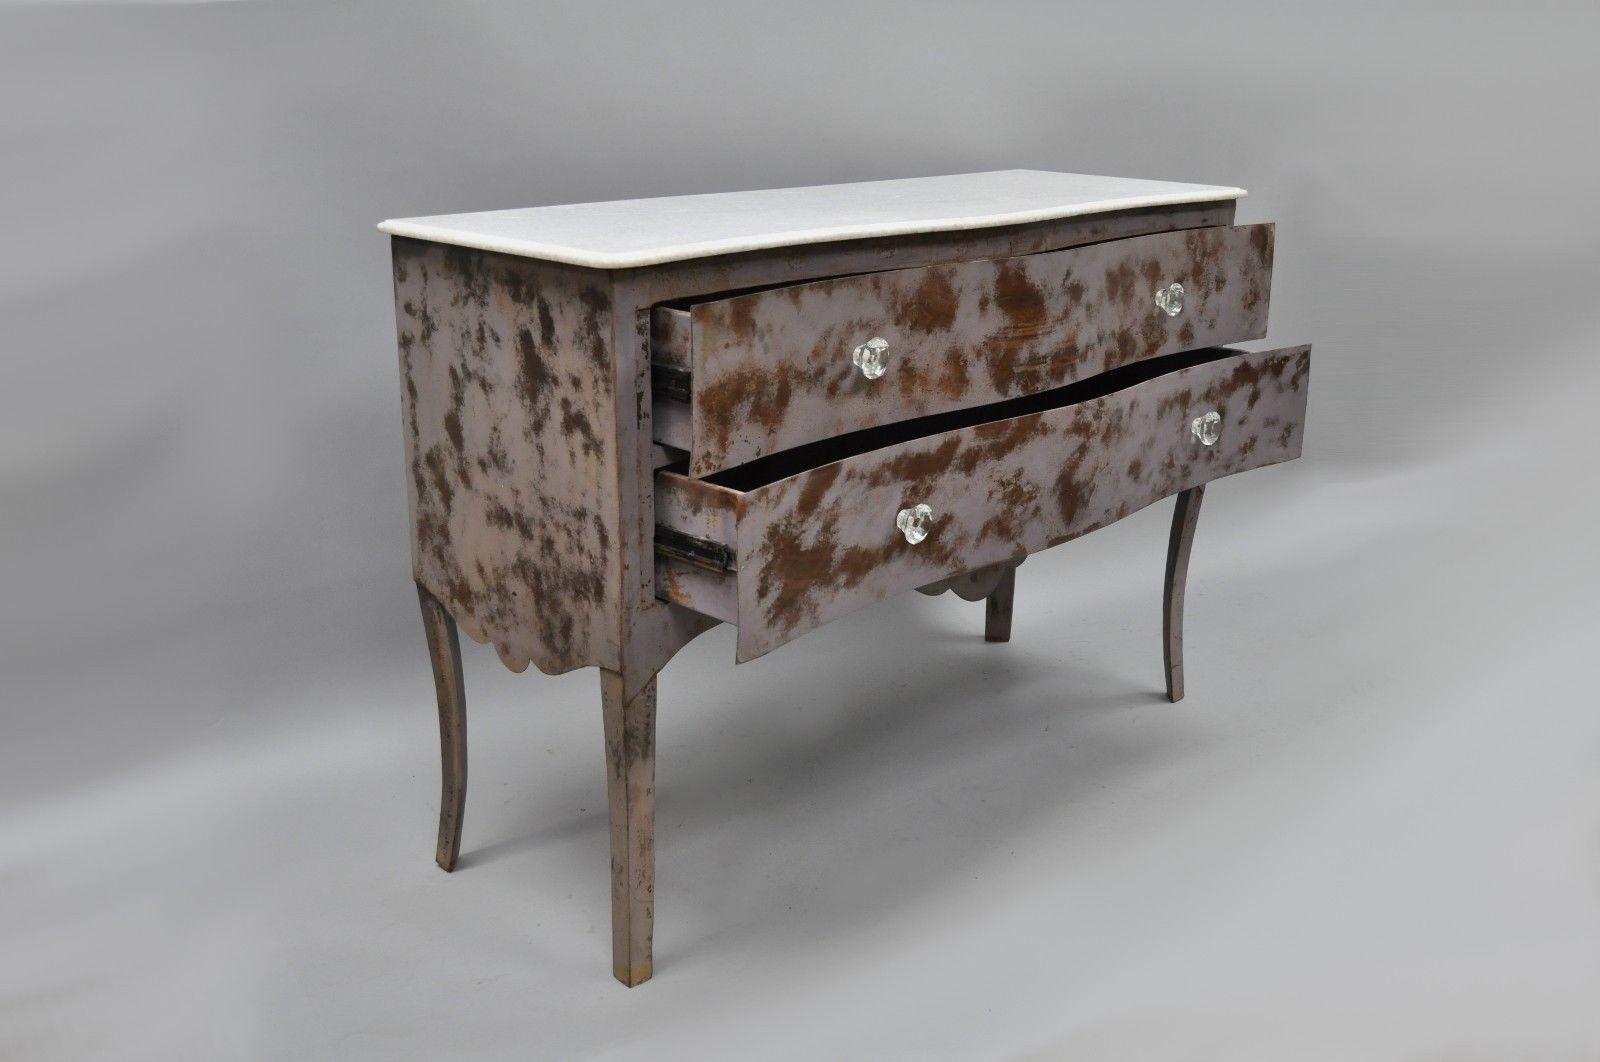 Steel metal French style marble-top bombe commode. Item features distressed purple faux wood grain painted finish, two drawers, glass knobs, unique steel metal frame, interior drawer stoppers, approximately 220 lbs total, unique style and form,